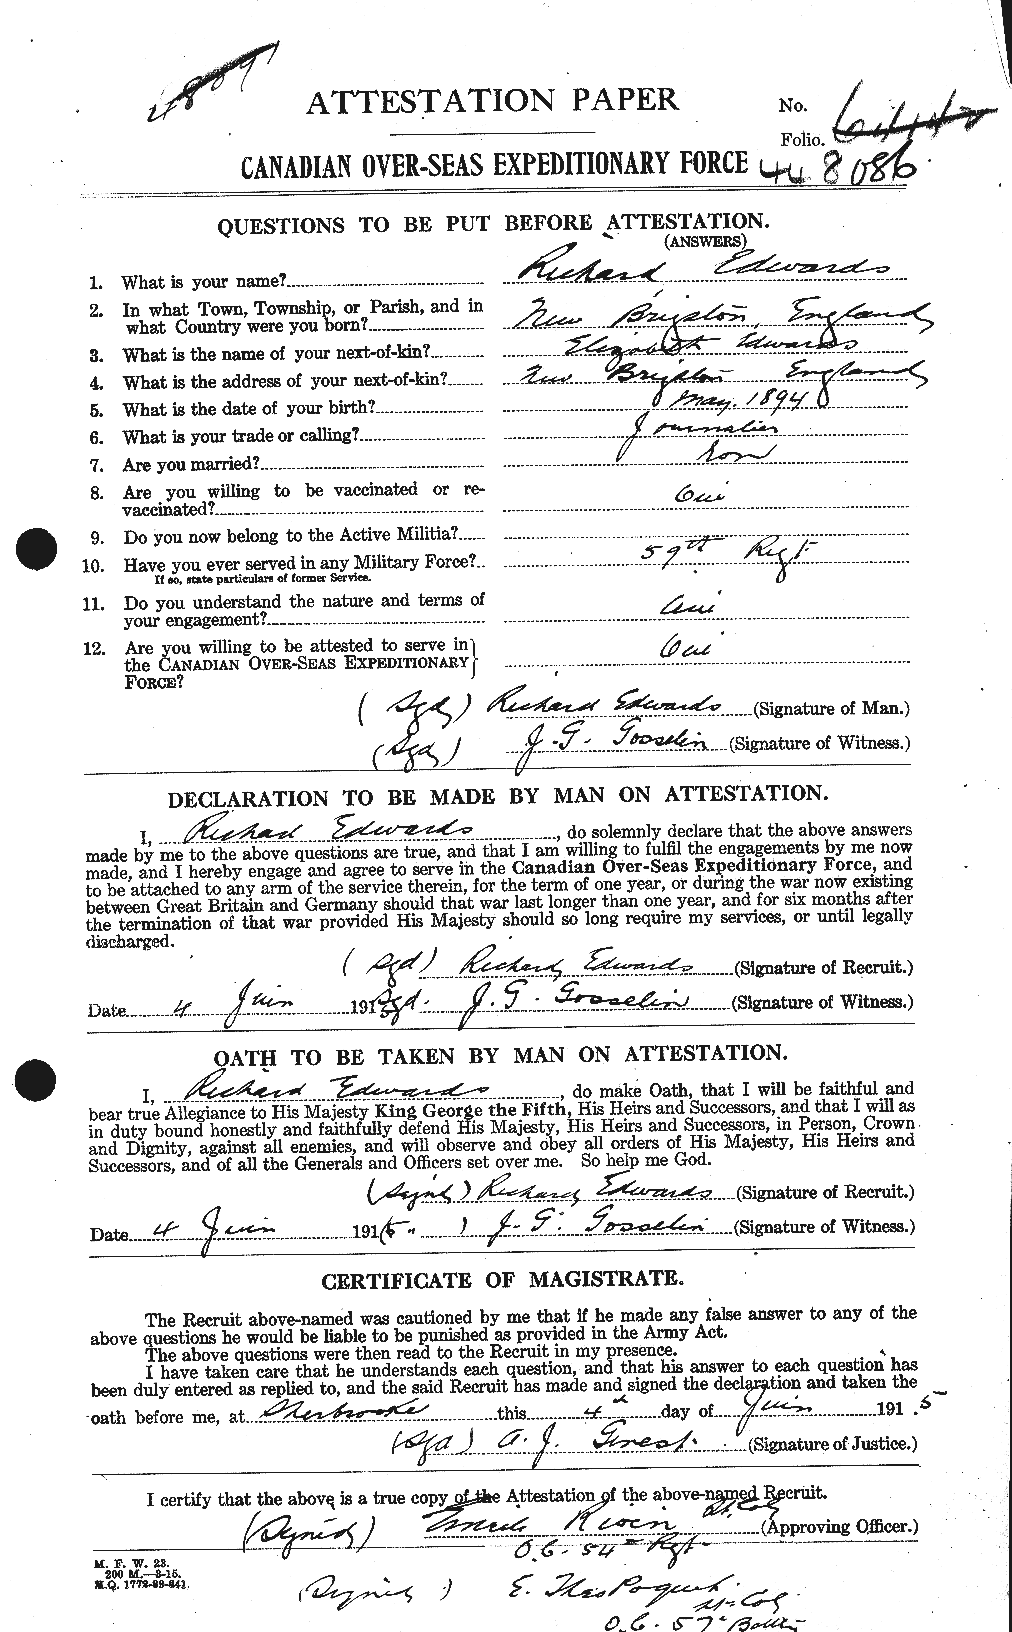 Personnel Records of the First World War - CEF 310254a